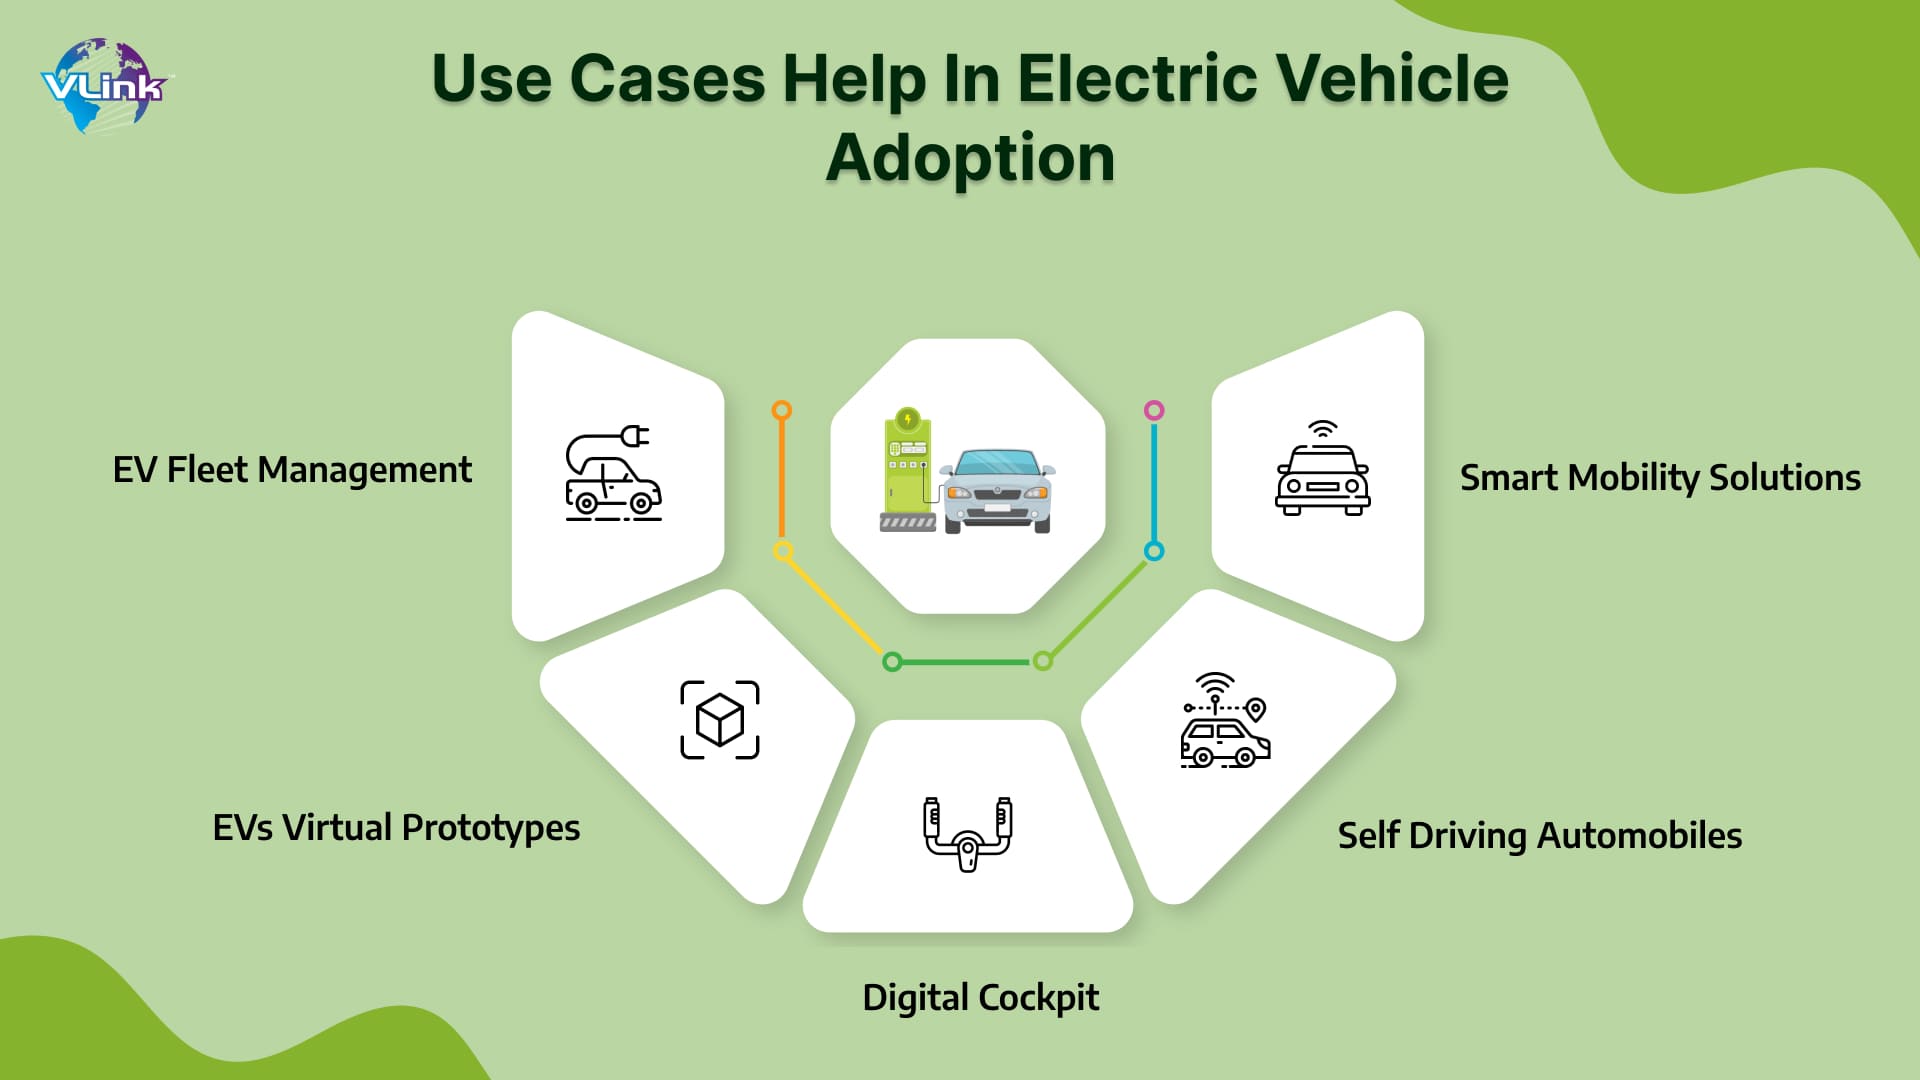 Use Cases That Help in EV Adoption